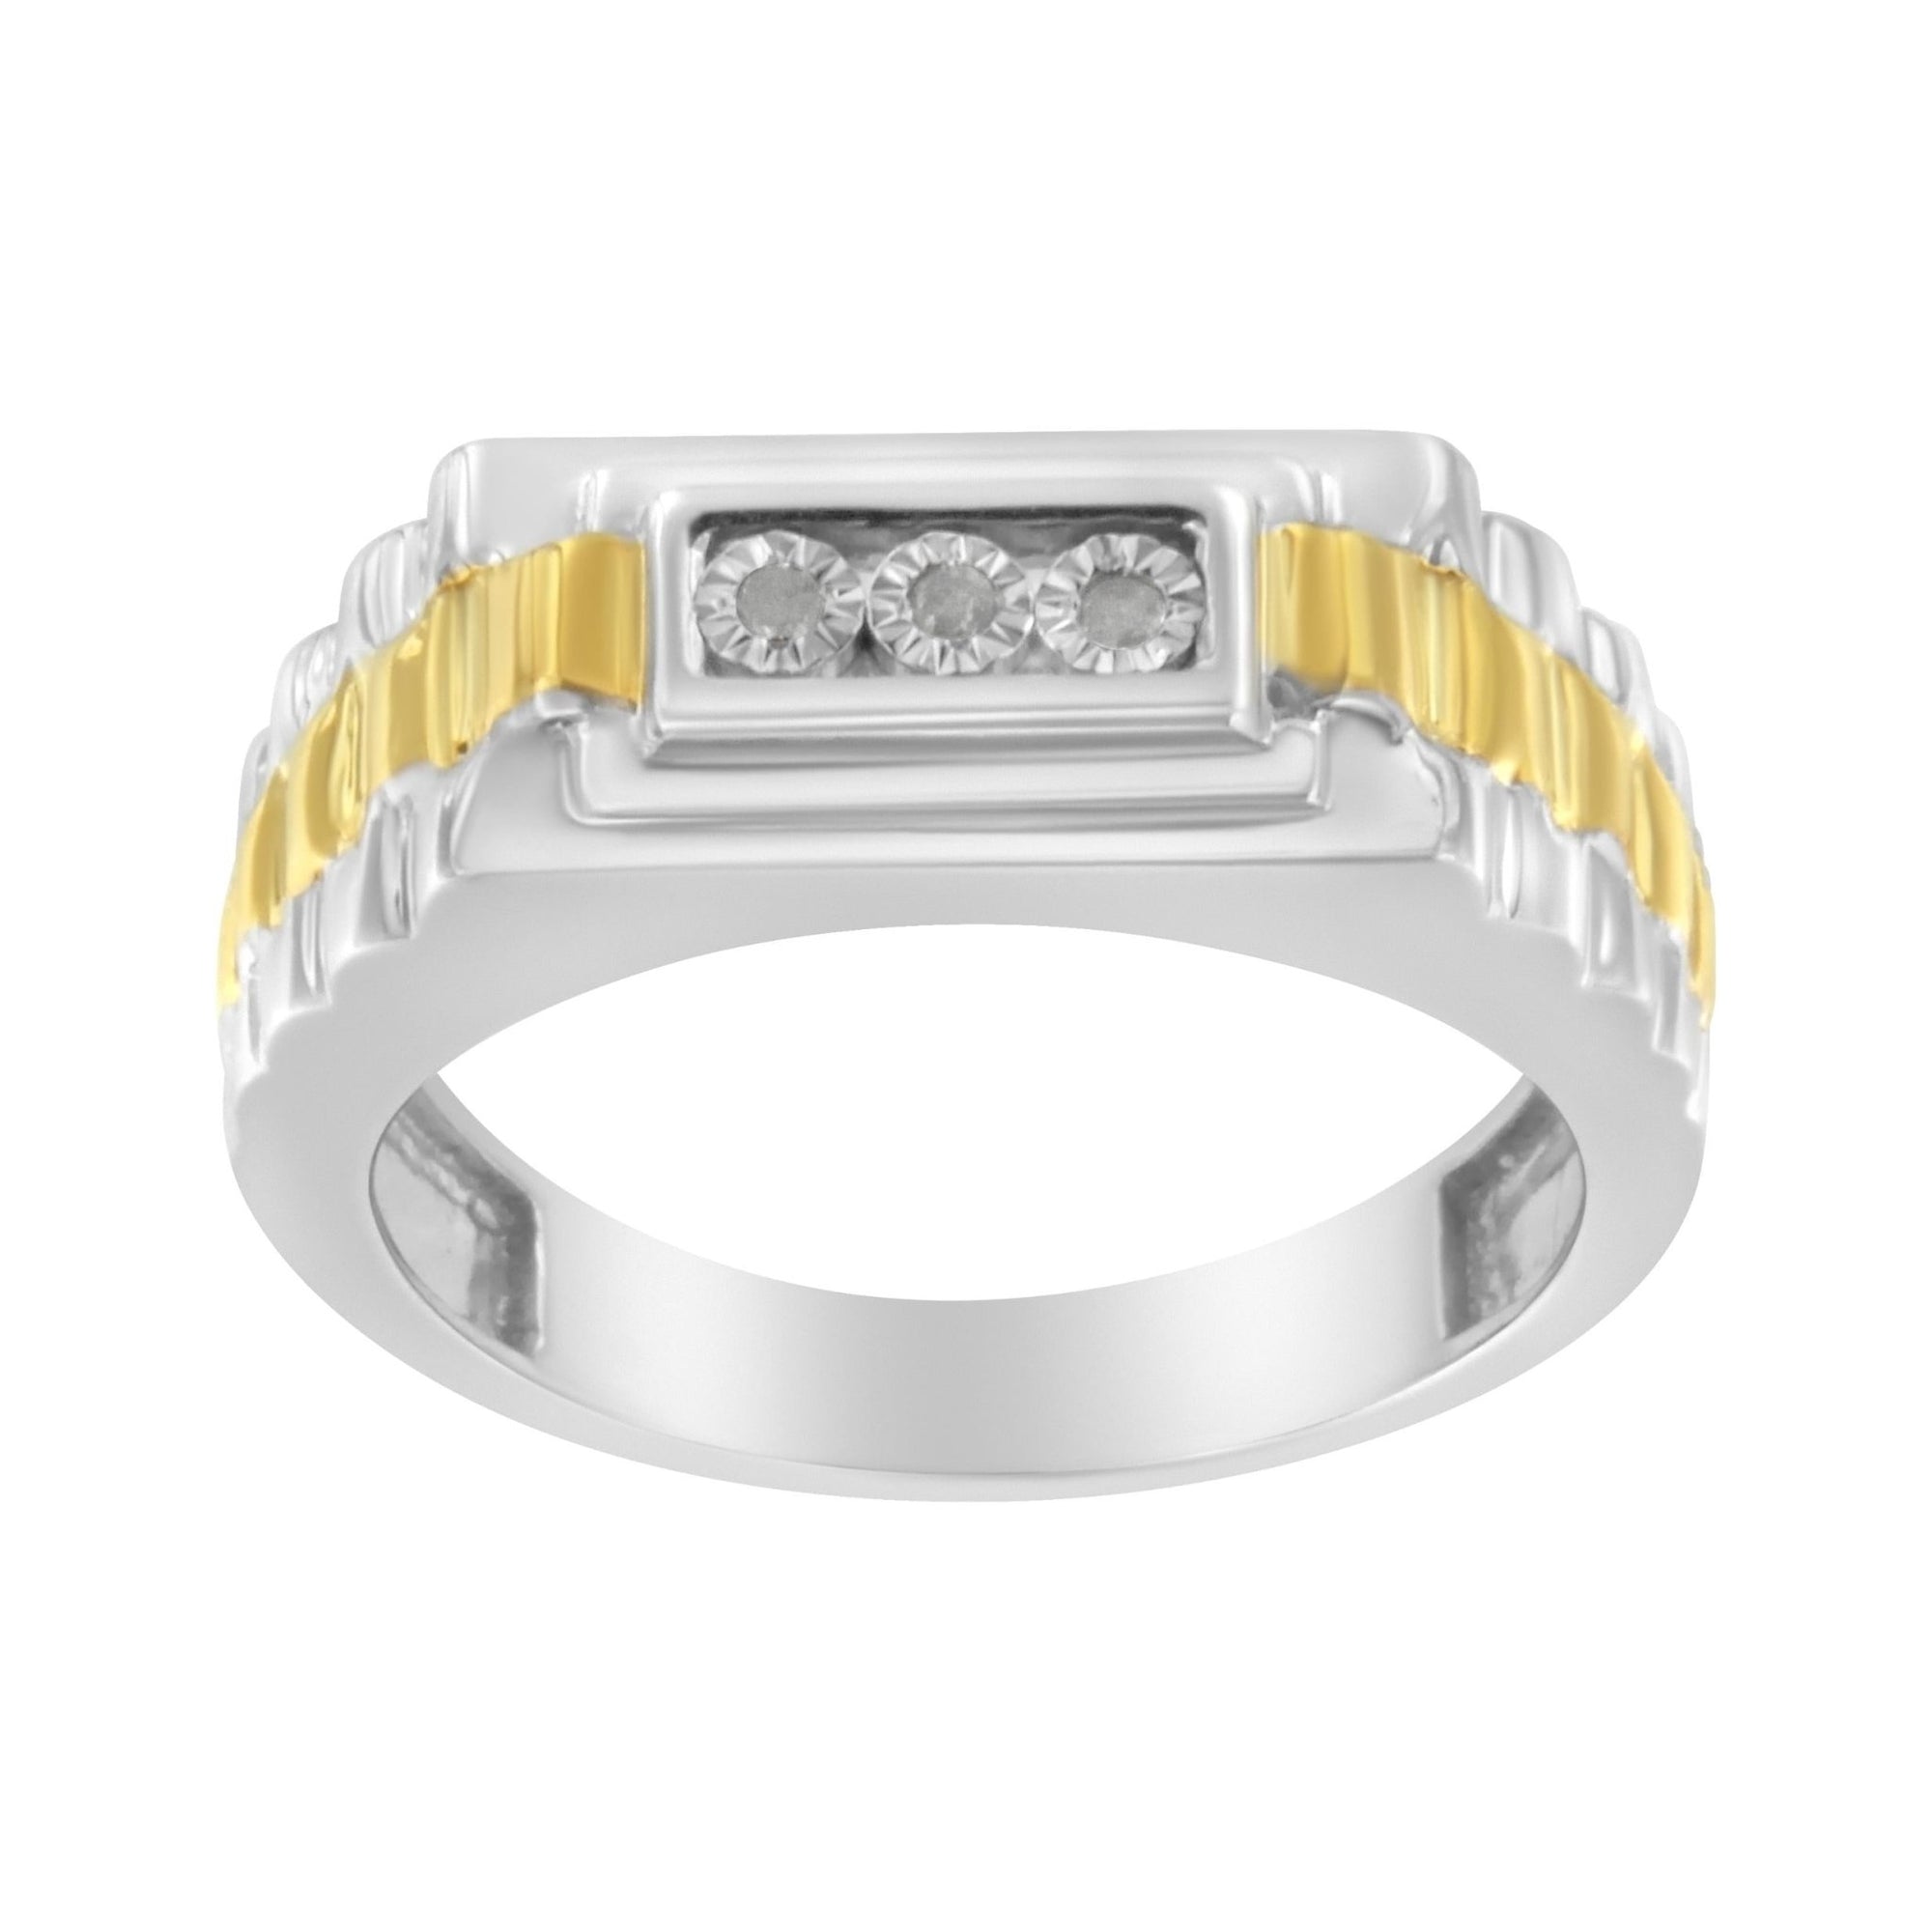 10K Yellow Gold Plated .925 Sterling Silver Diamond Accent Miracle-Set 3 Stone Ridged Band Gentlemen's Fashion Ring (I-J Color, I2-I3 Clarity) - Size 11 - LinkagejewelrydesignLinkagejewelrydesign